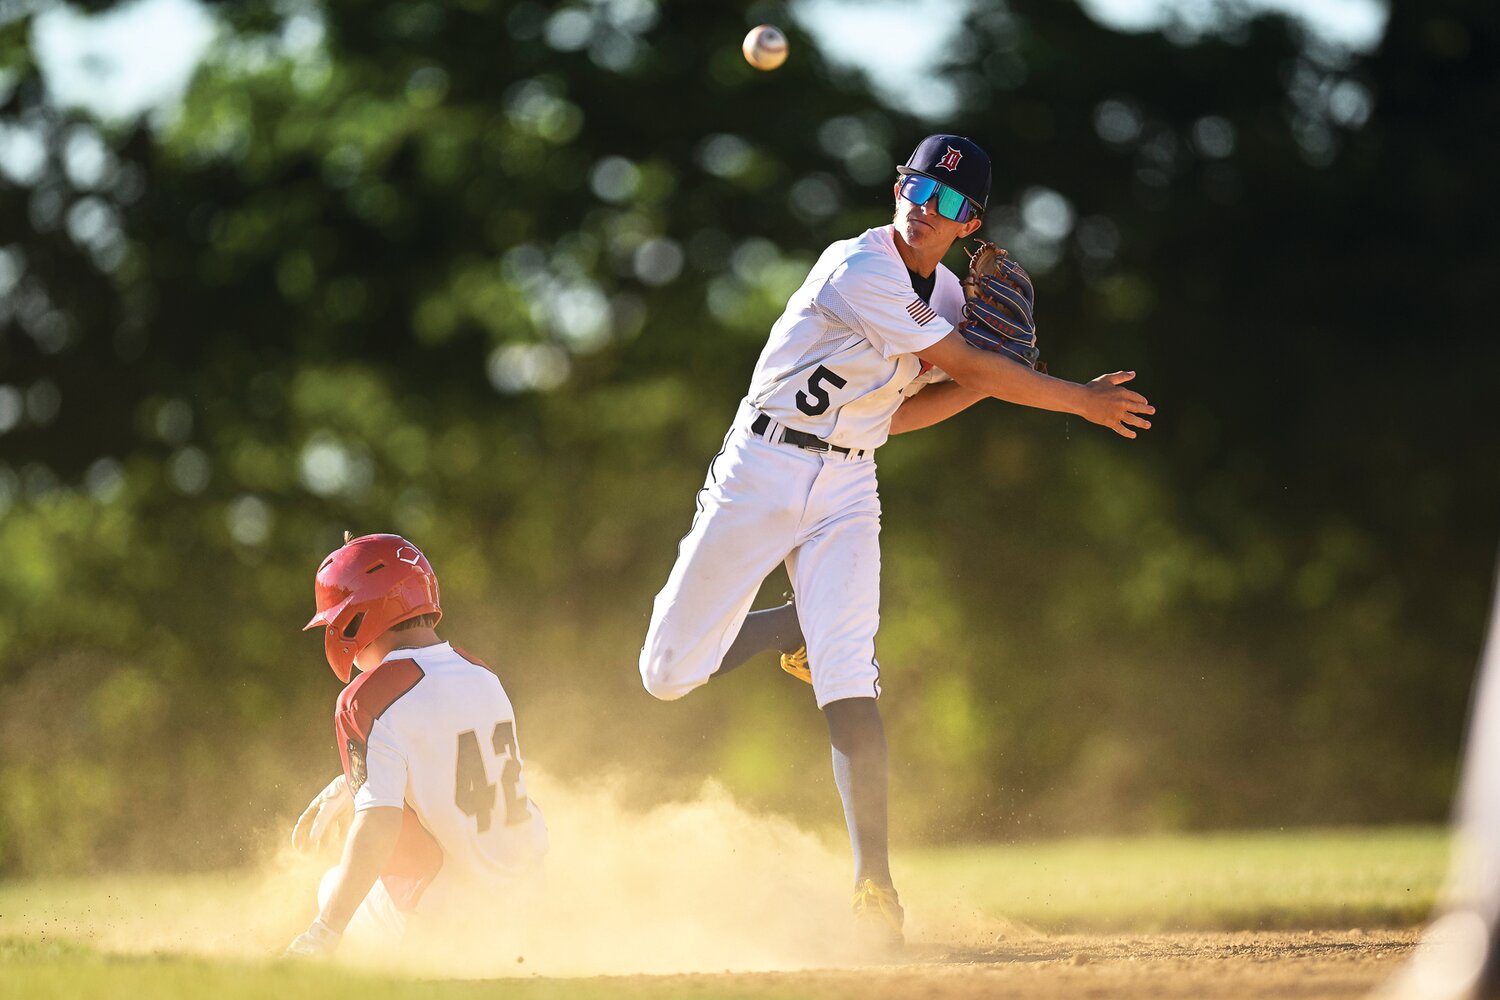 Doylestown’s Bobby Seaner tries to turn a double play in the third inning.